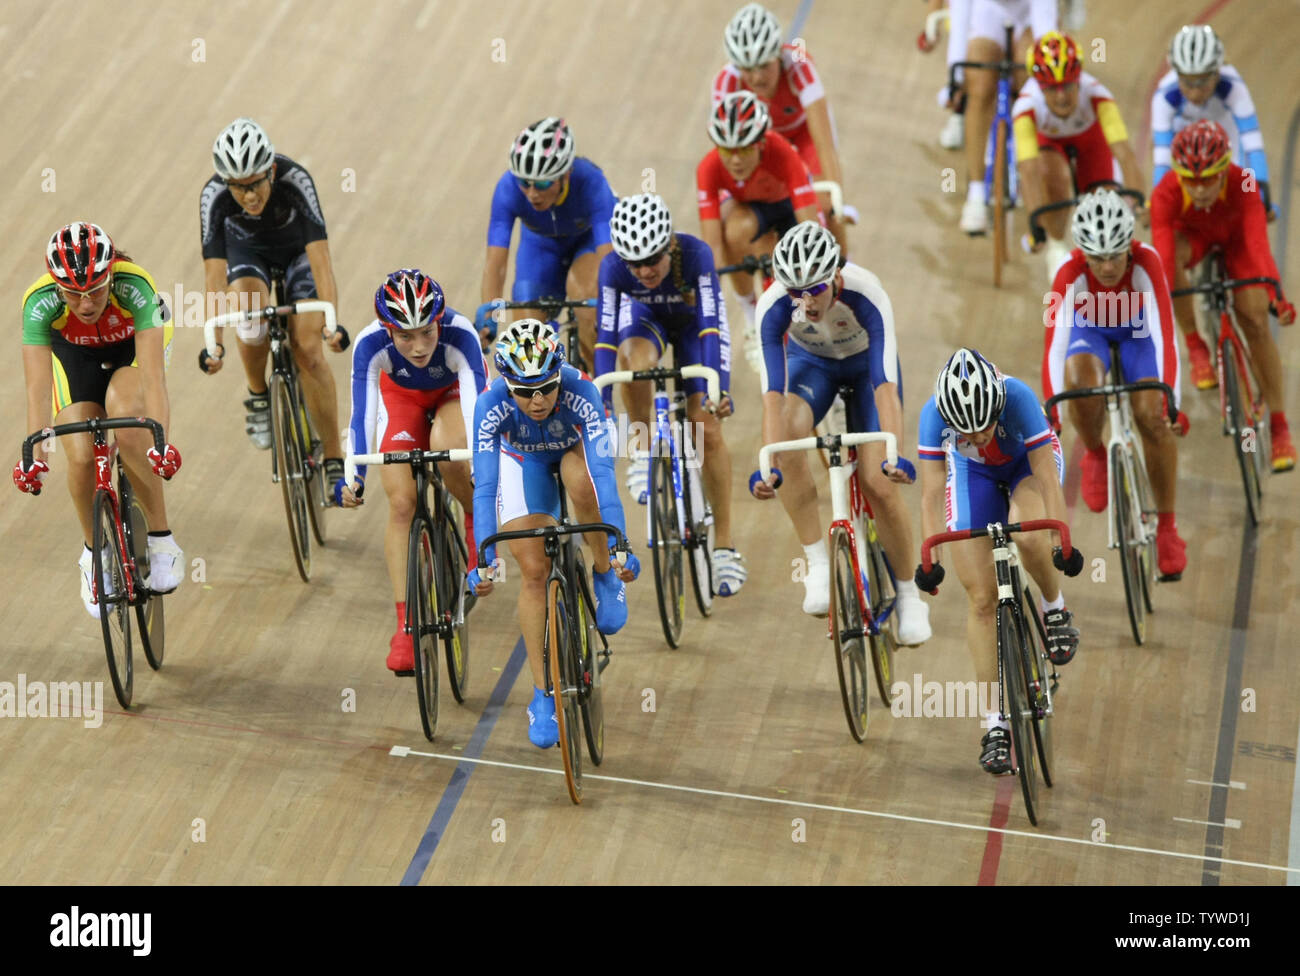 Cyclists sprint during the 100-lap Olympic women's point's race final at the Laoshan velodrome in Beijing August 18, 2008.  Dutch cyclist Marianne Vos captured the gold with 30 points, Cuba's Yoanka Gonzalez the silver with 18 points and  Spain's Leire Olaberria the bronze with 13 points.   (UPI Photo/Stephen Shaver) Stock Photo